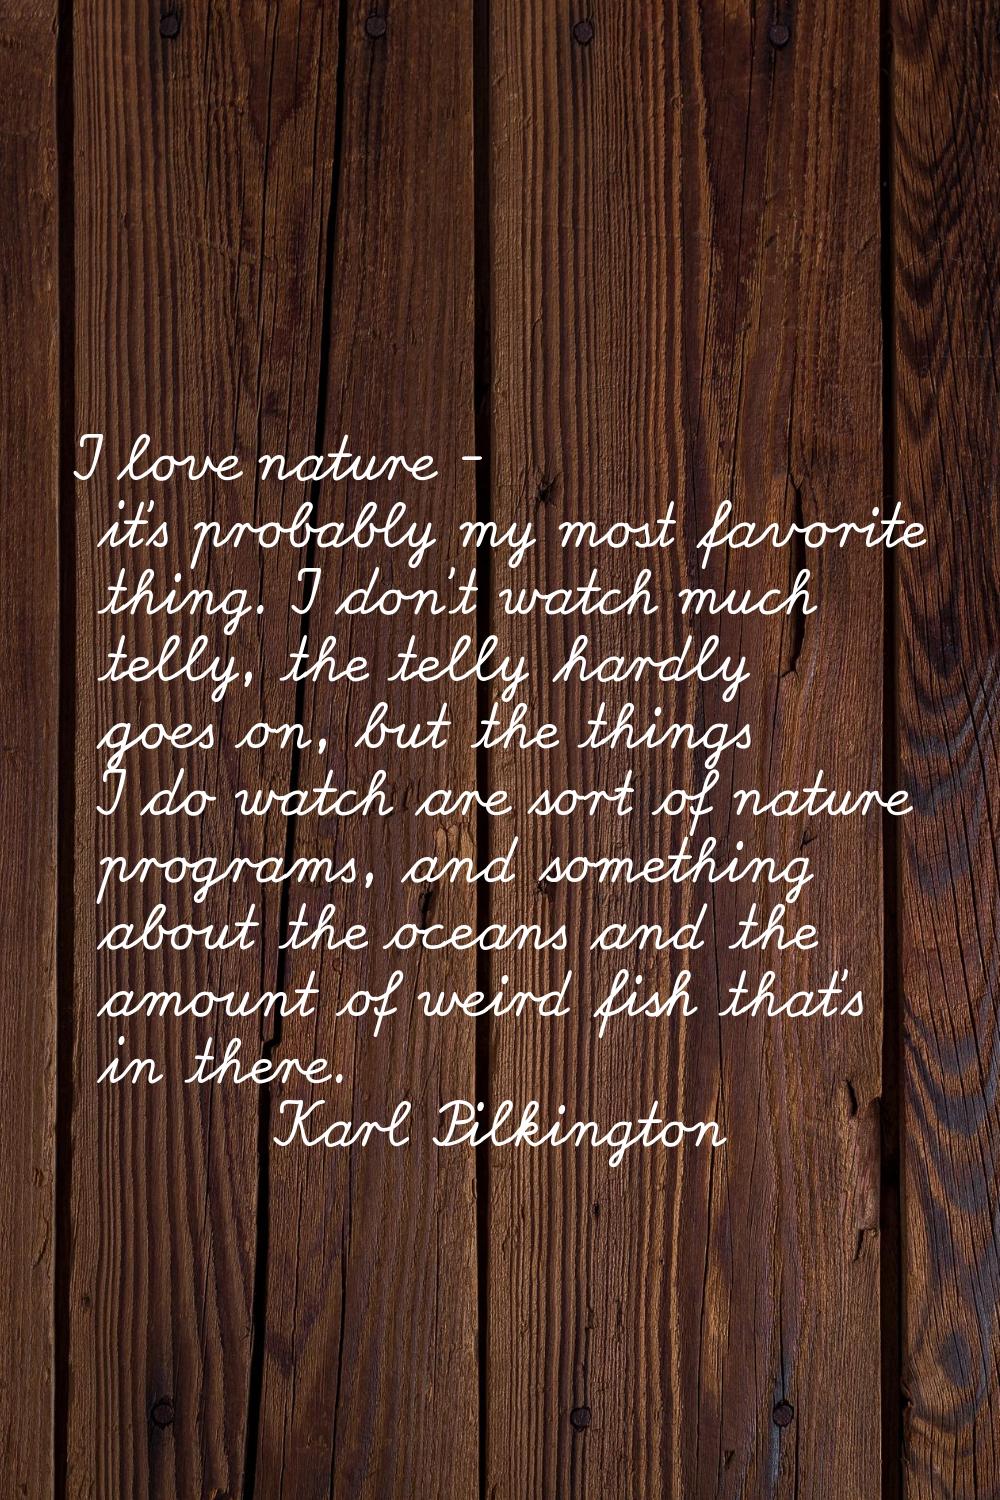 I love nature - it's probably my most favorite thing. I don't watch much telly, the telly hardly go